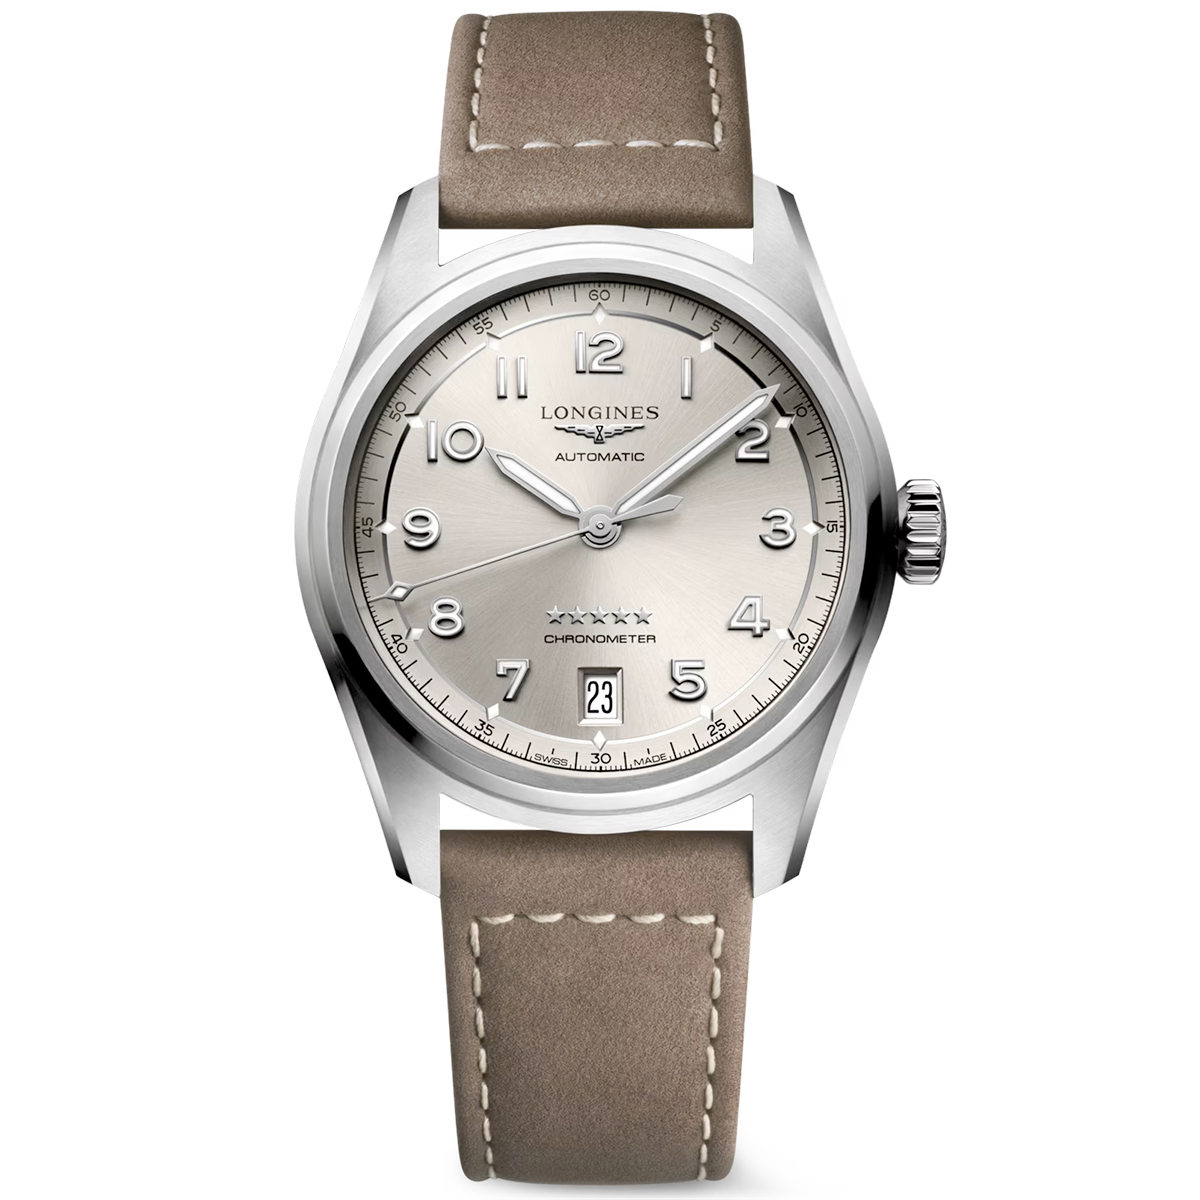 Spirit 37mm Champagne Dial Automatic Leather Strap Watch